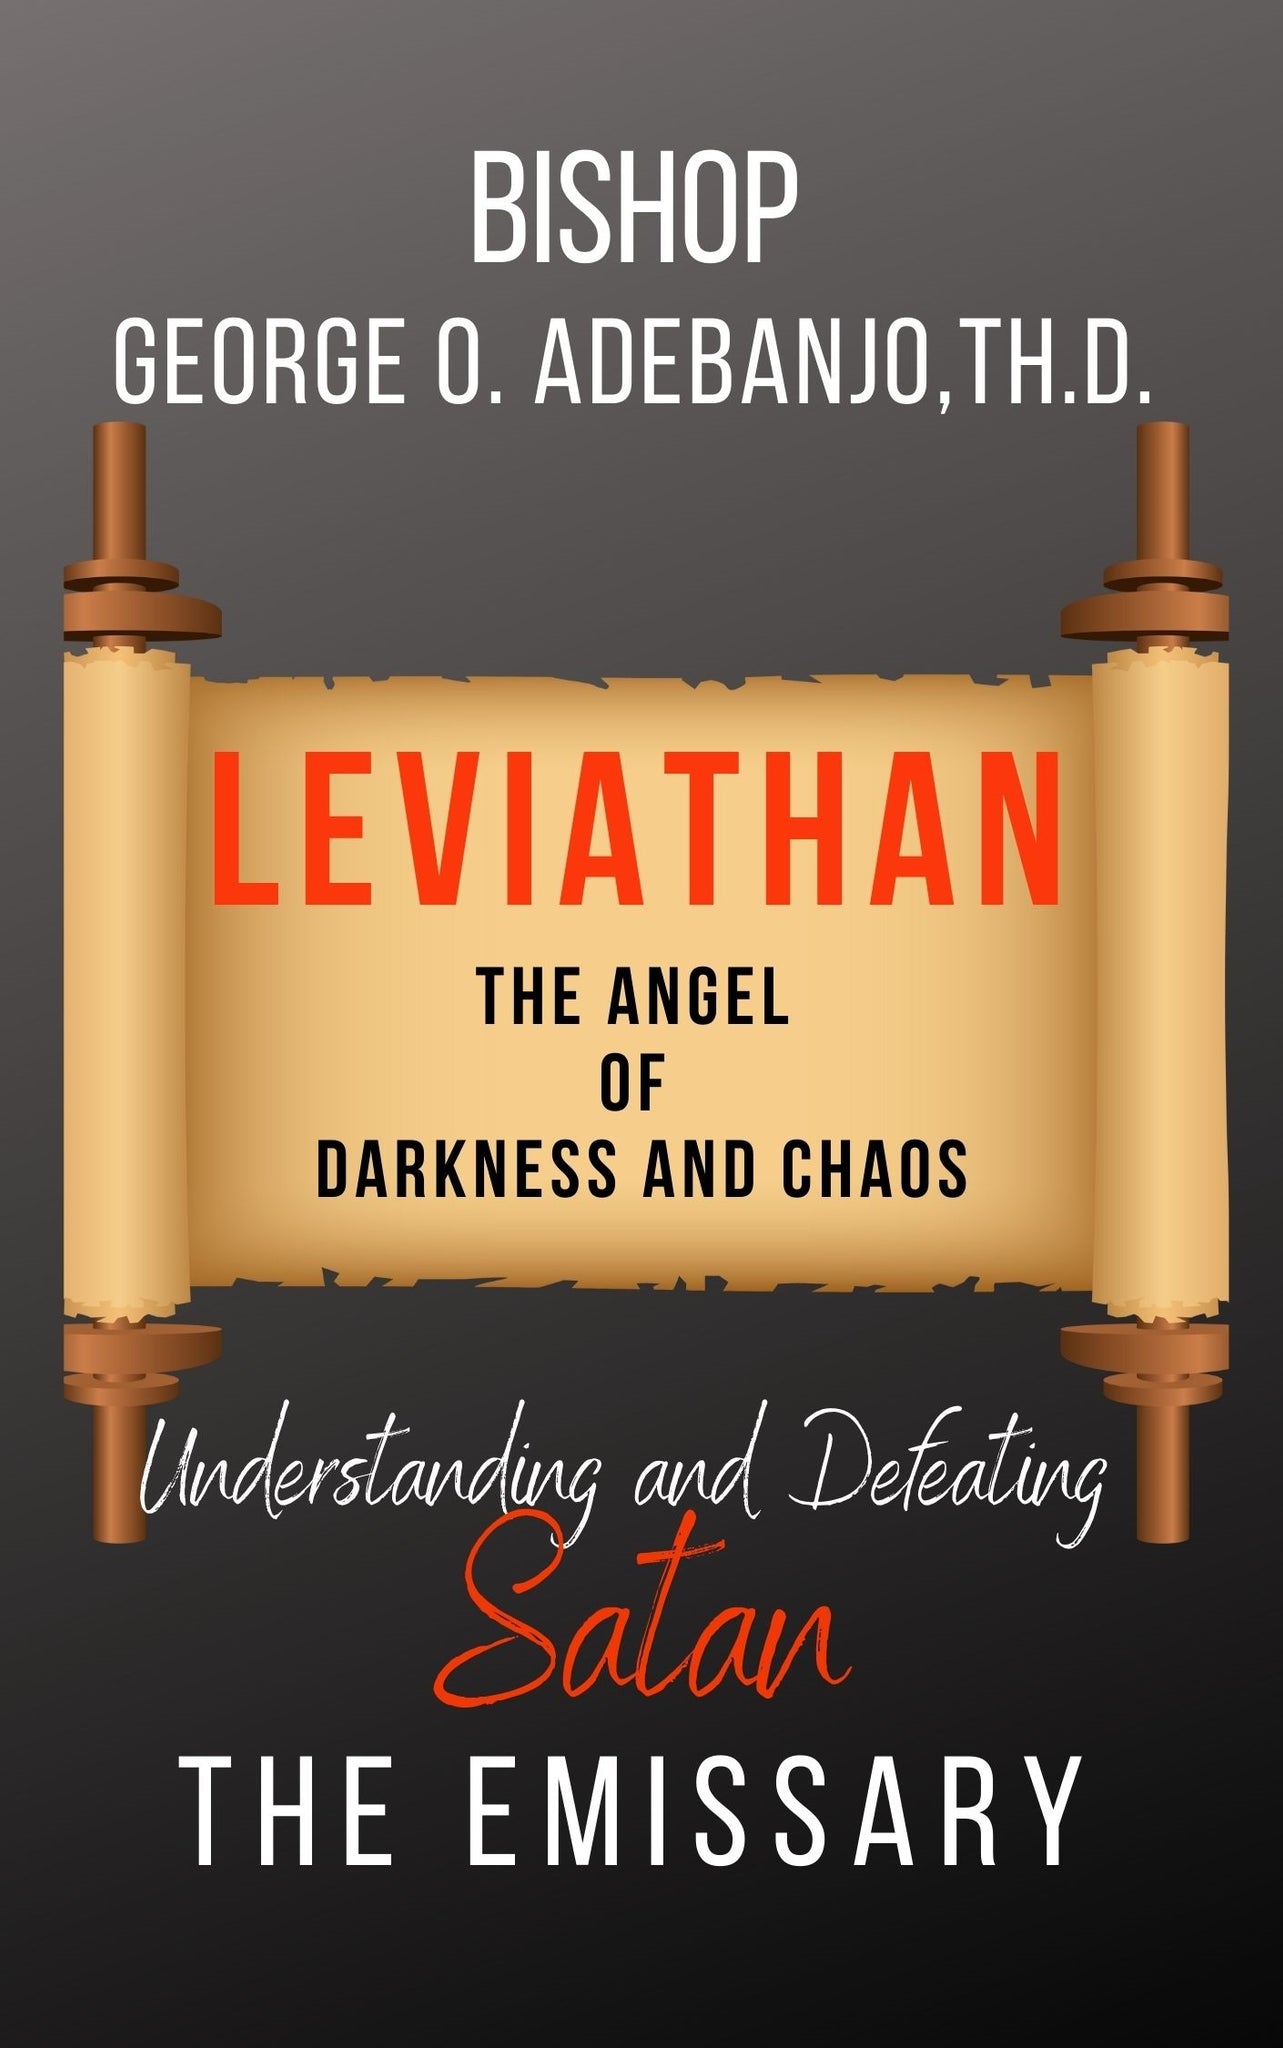 LEVIATHAN: THE ANGEL OF DARKNESS AND CHAOS